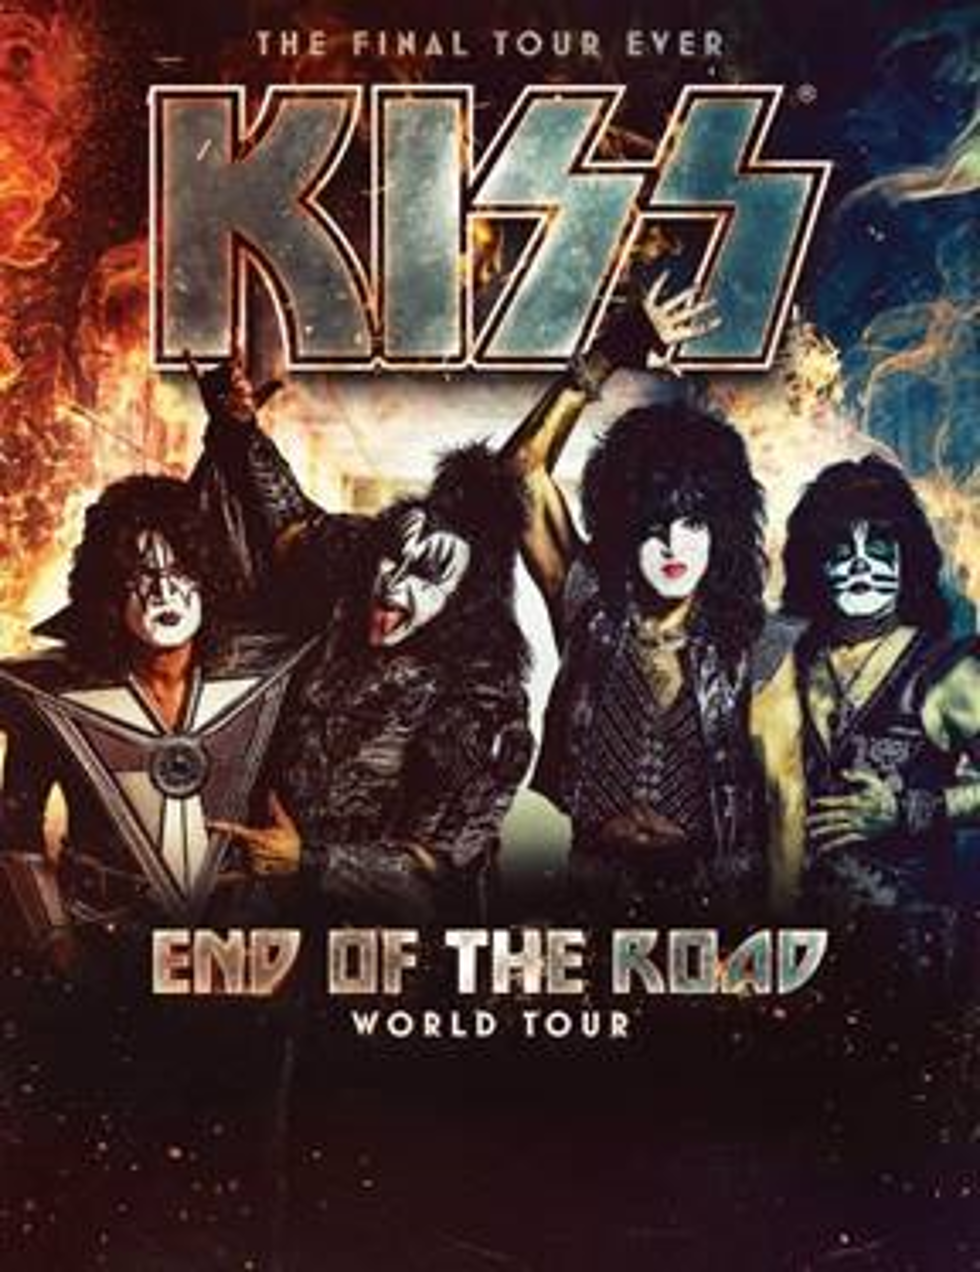 Kiss Announces David Lee Roth &#8211; Special Guest on Tour &#8211; Gorge Gig